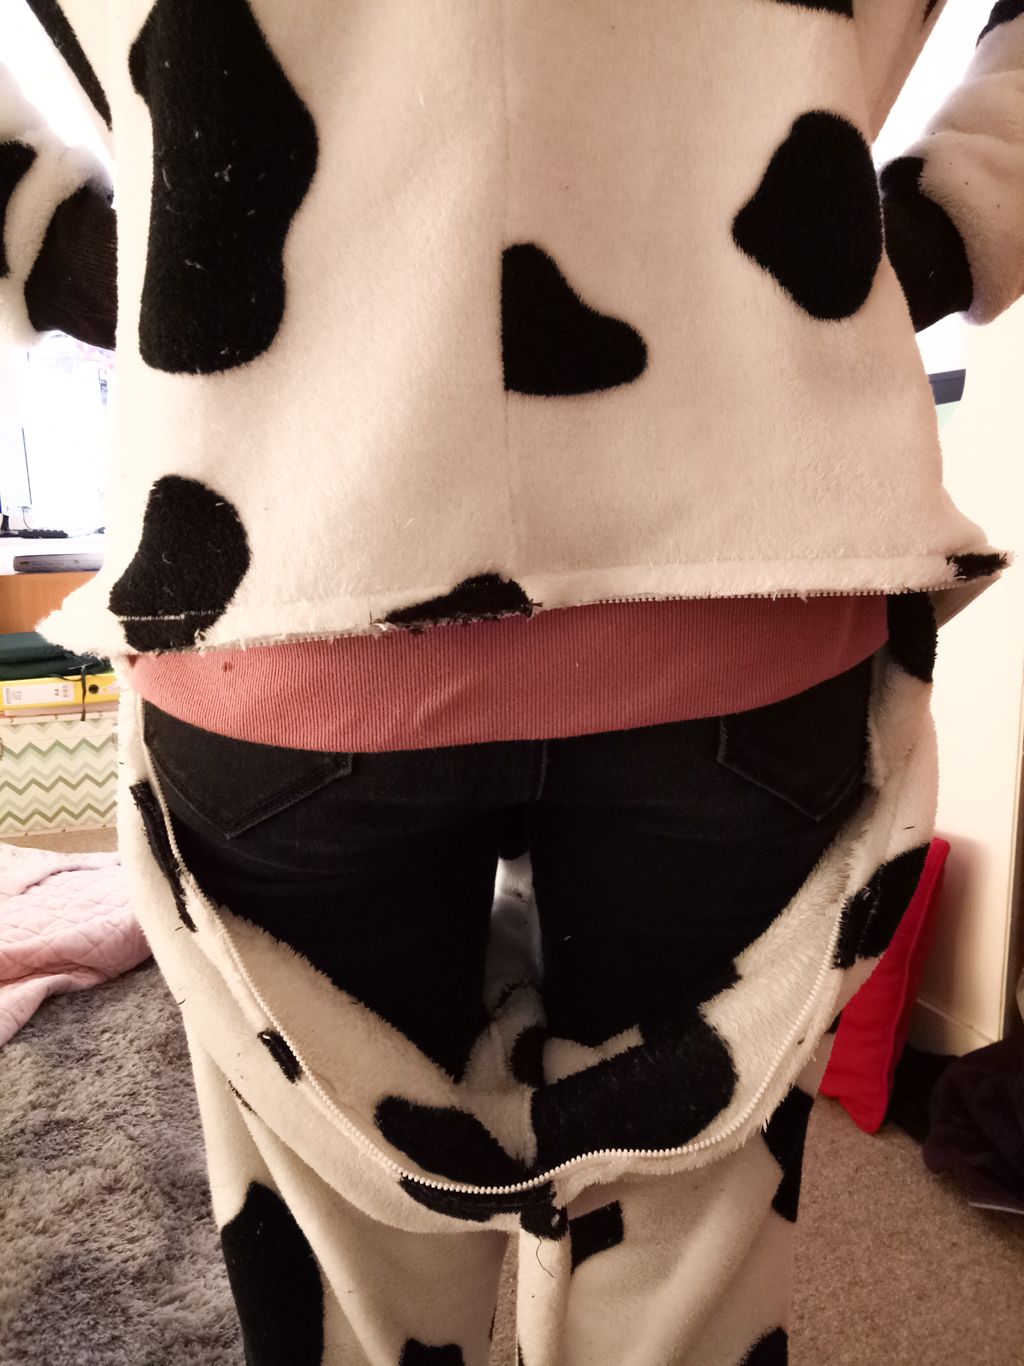 Zipper inserted and opened in butt of cow onesie